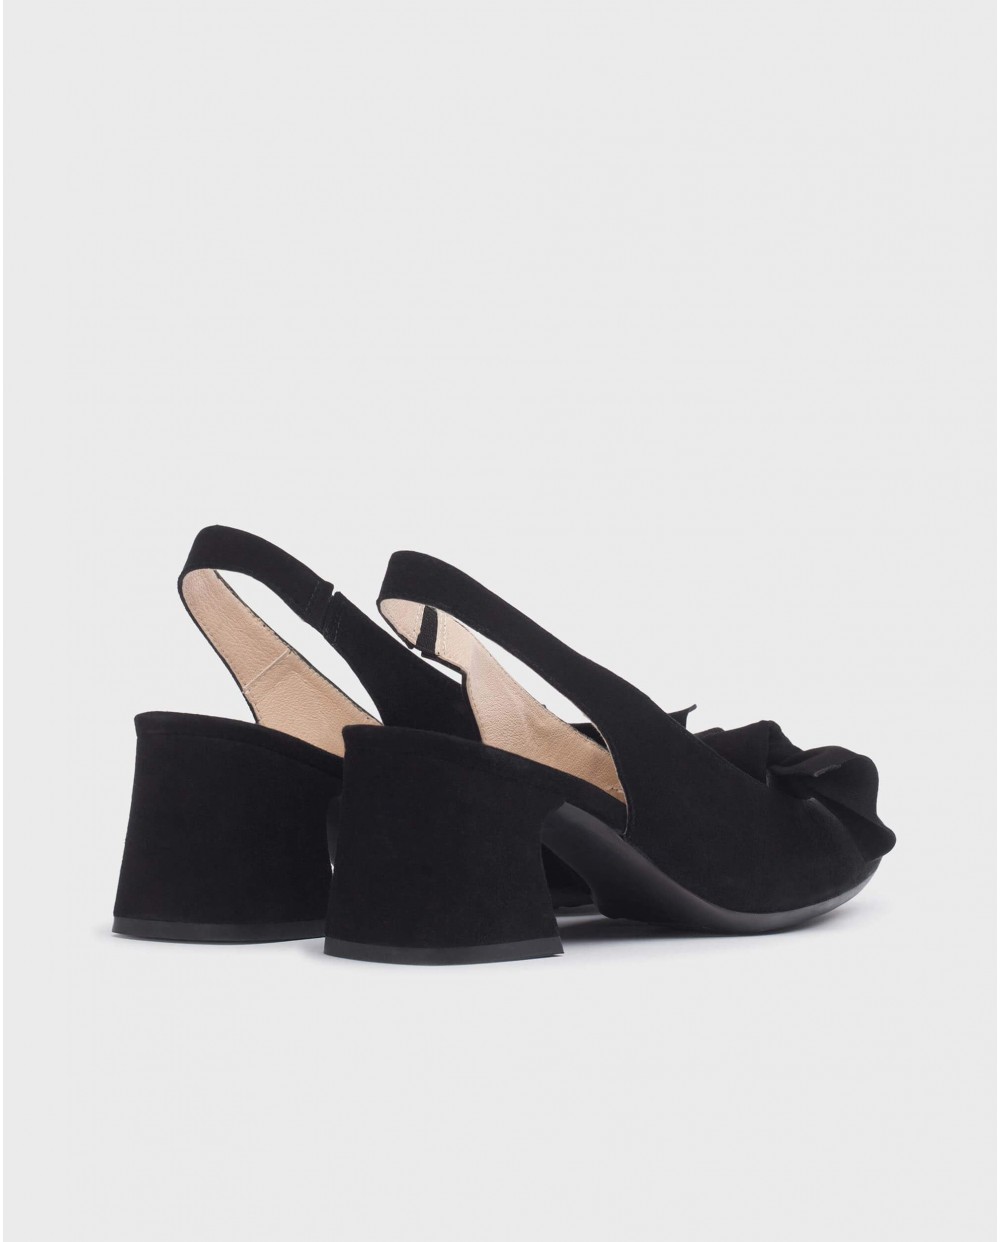 Wonders-Outlet-Zapato Over negro